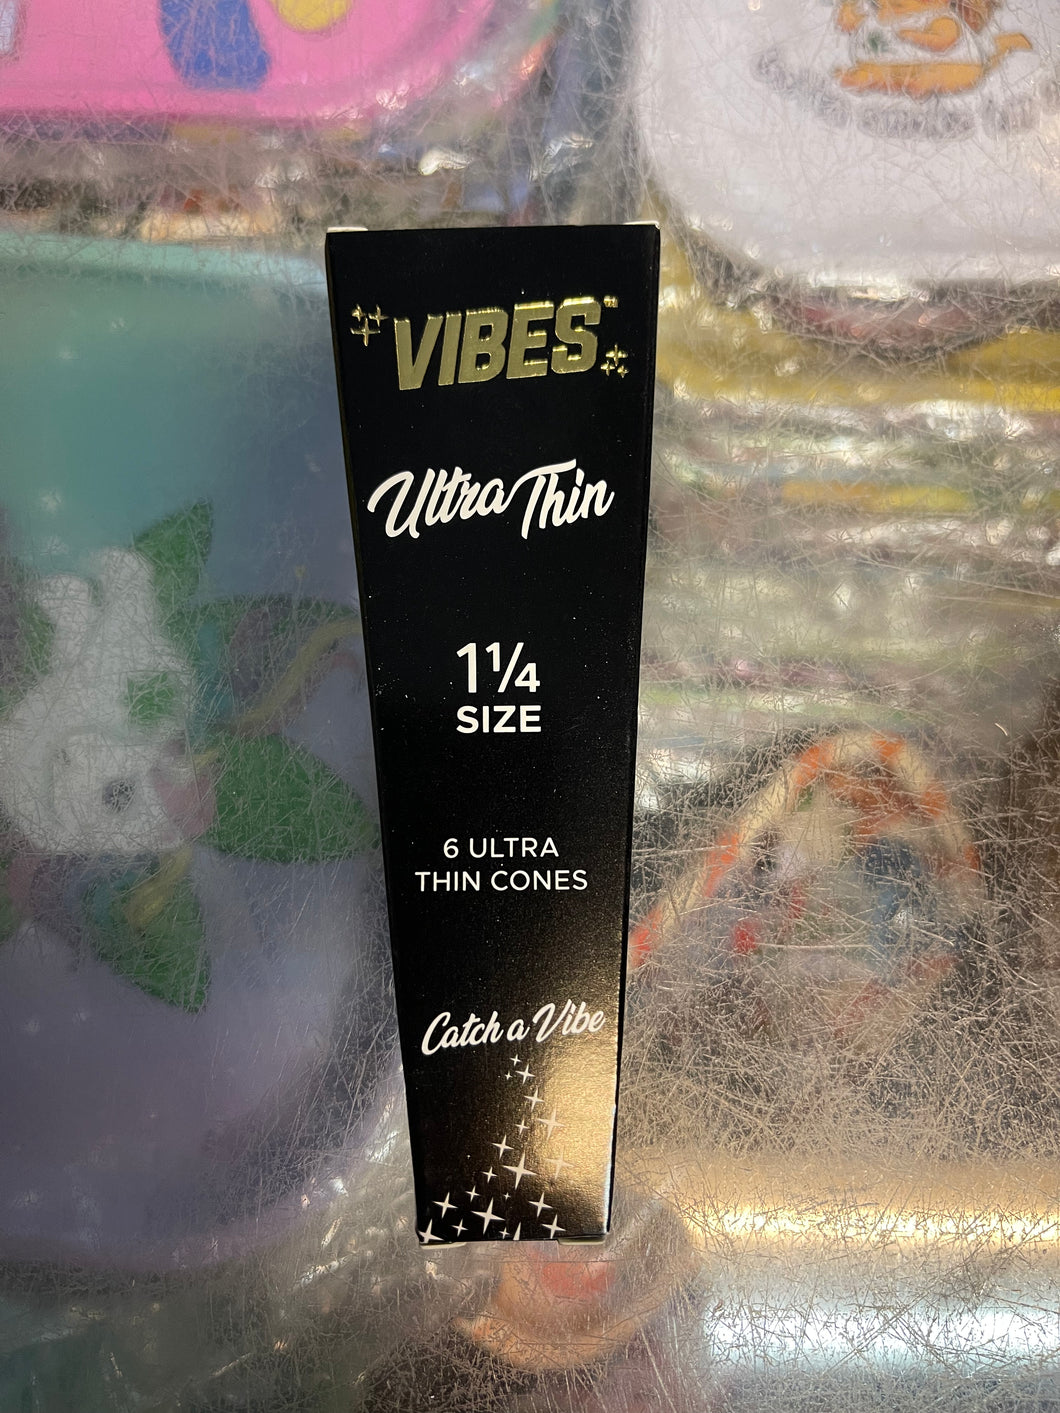 Vibes pre rolled 1 1/4 6 pack